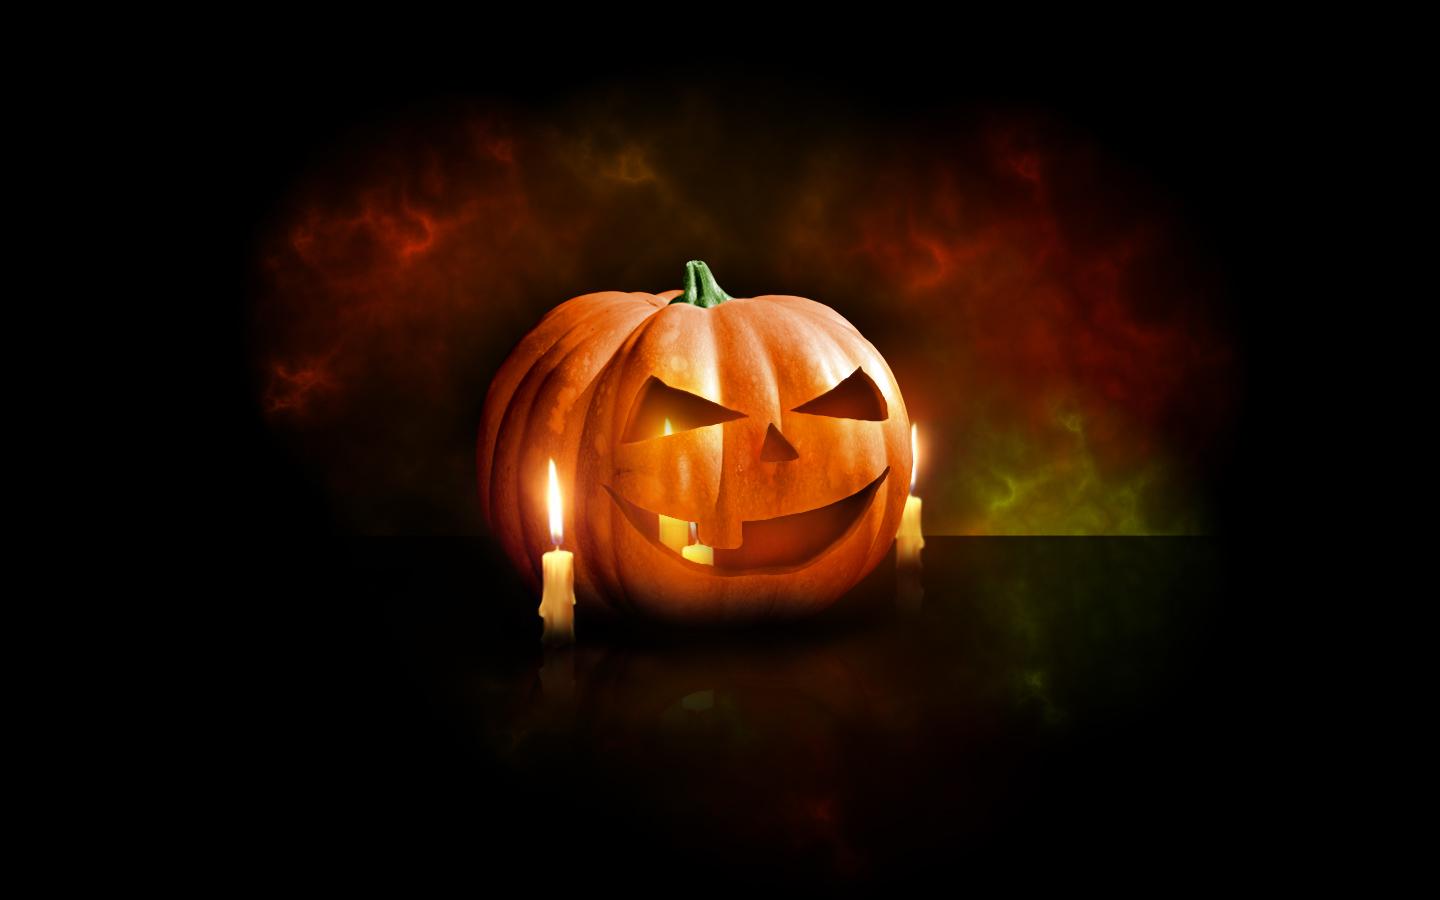 Scary Halloween Pumpkin Image, Picture, Wallpaper to